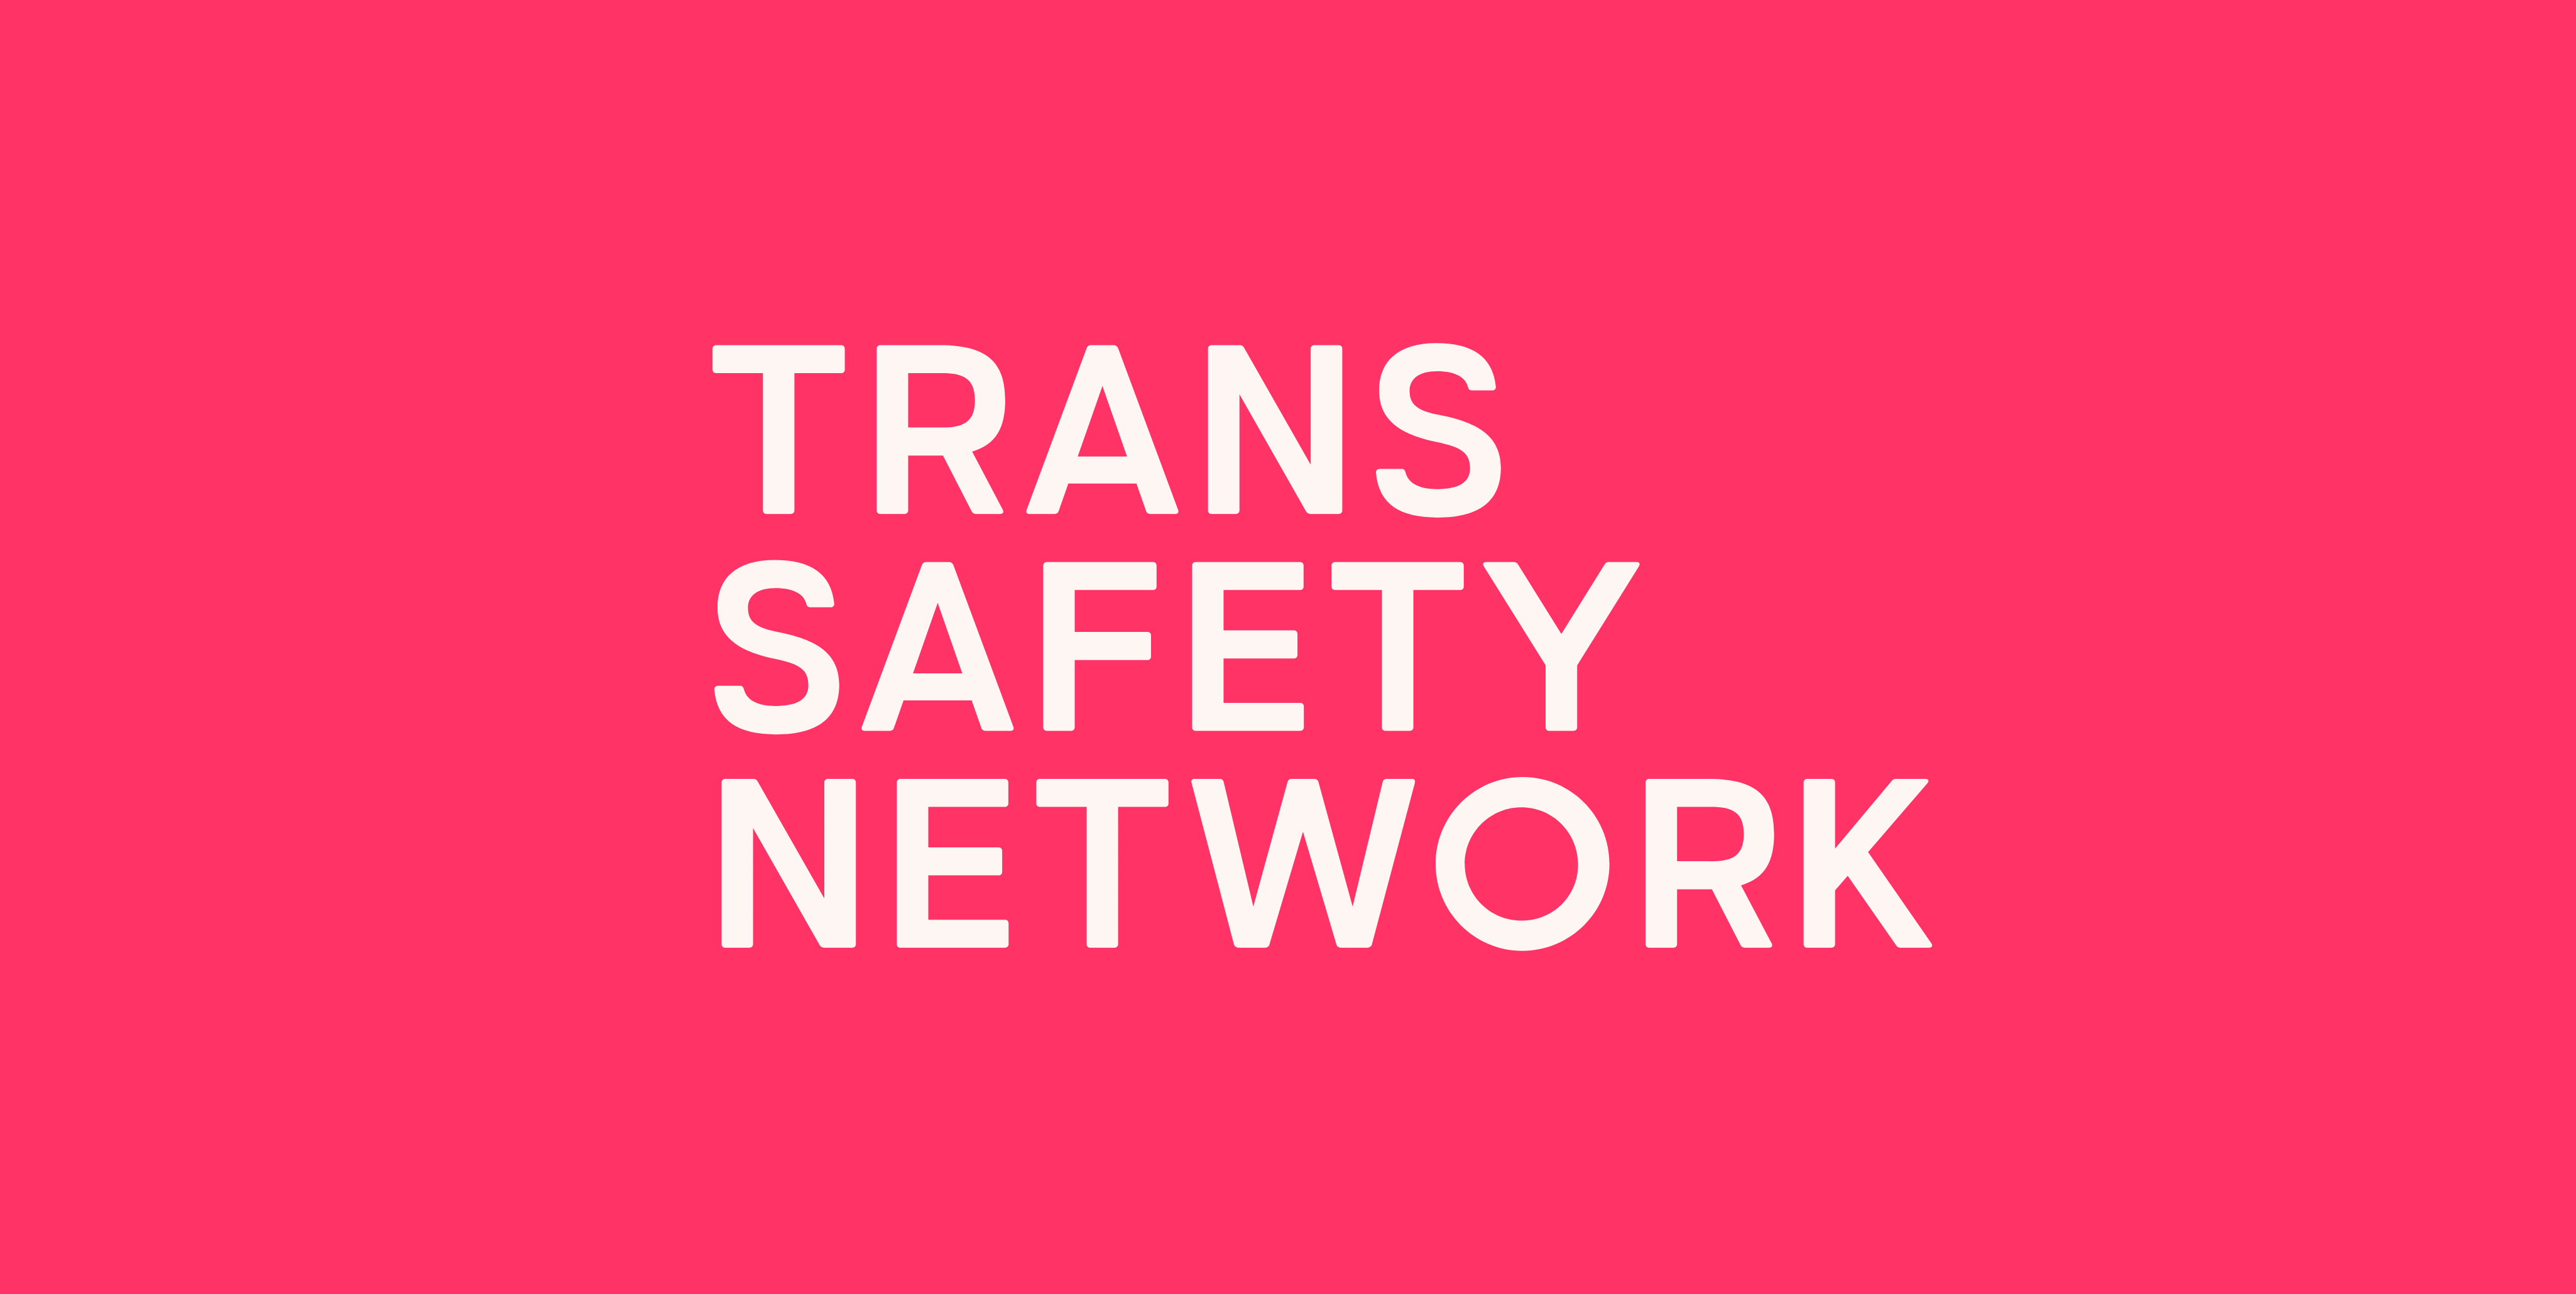 The Trans Safety Network logo, which features white text on a pink background